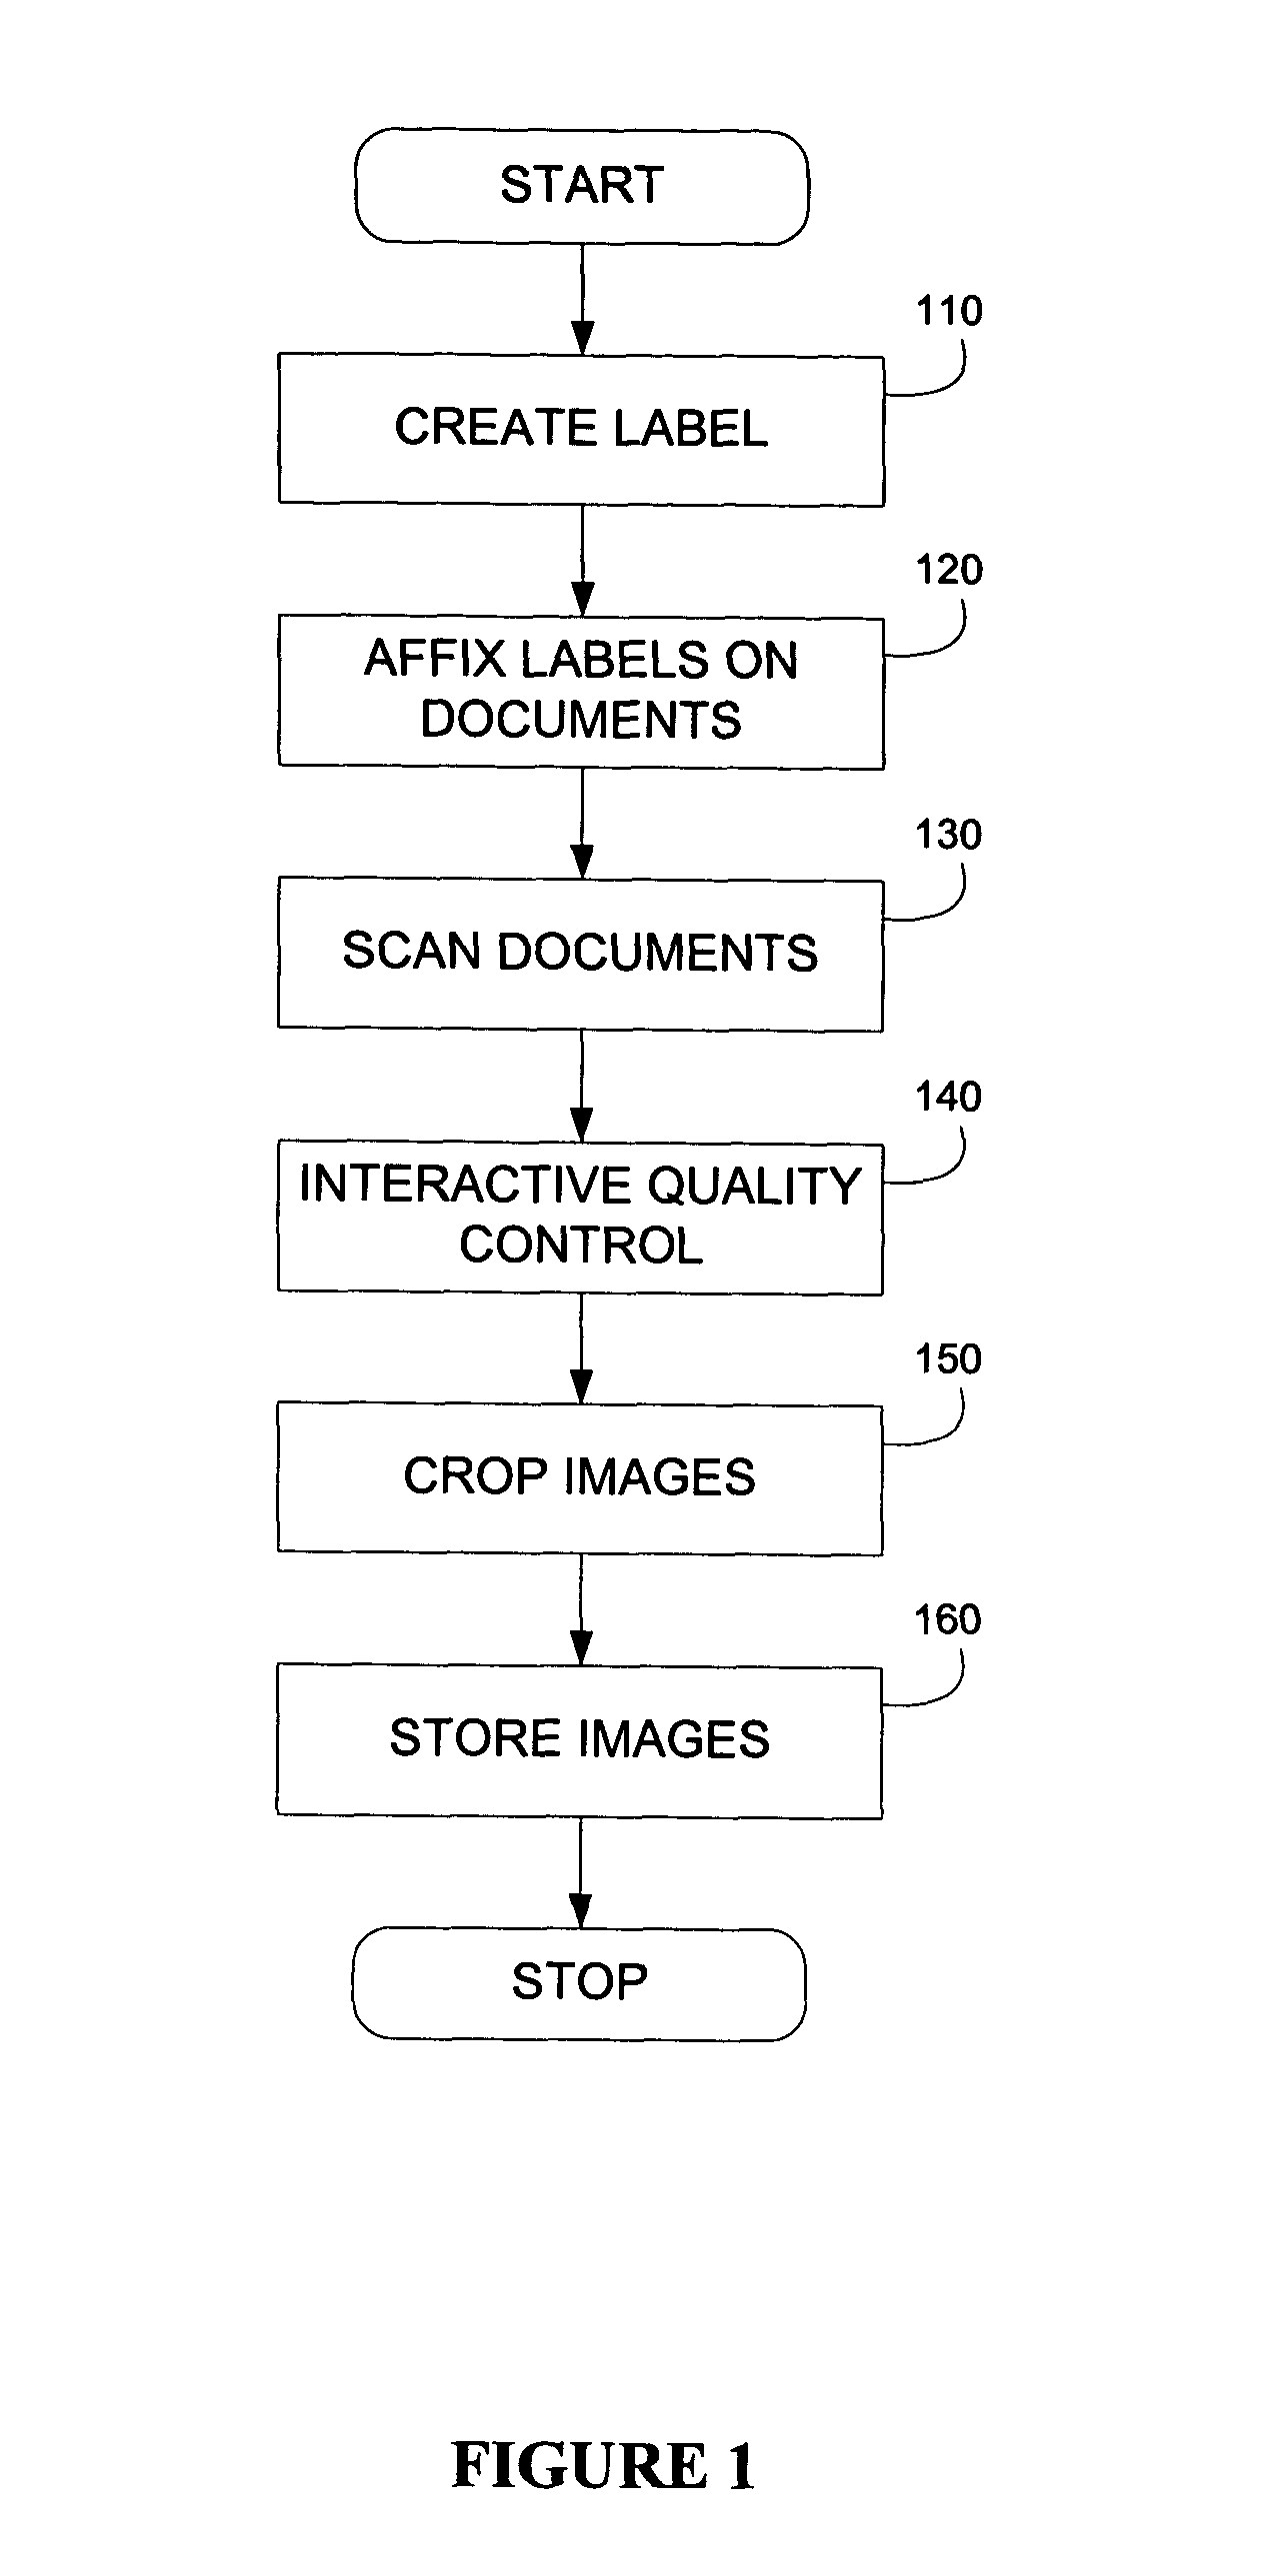 Labeling system and methodology